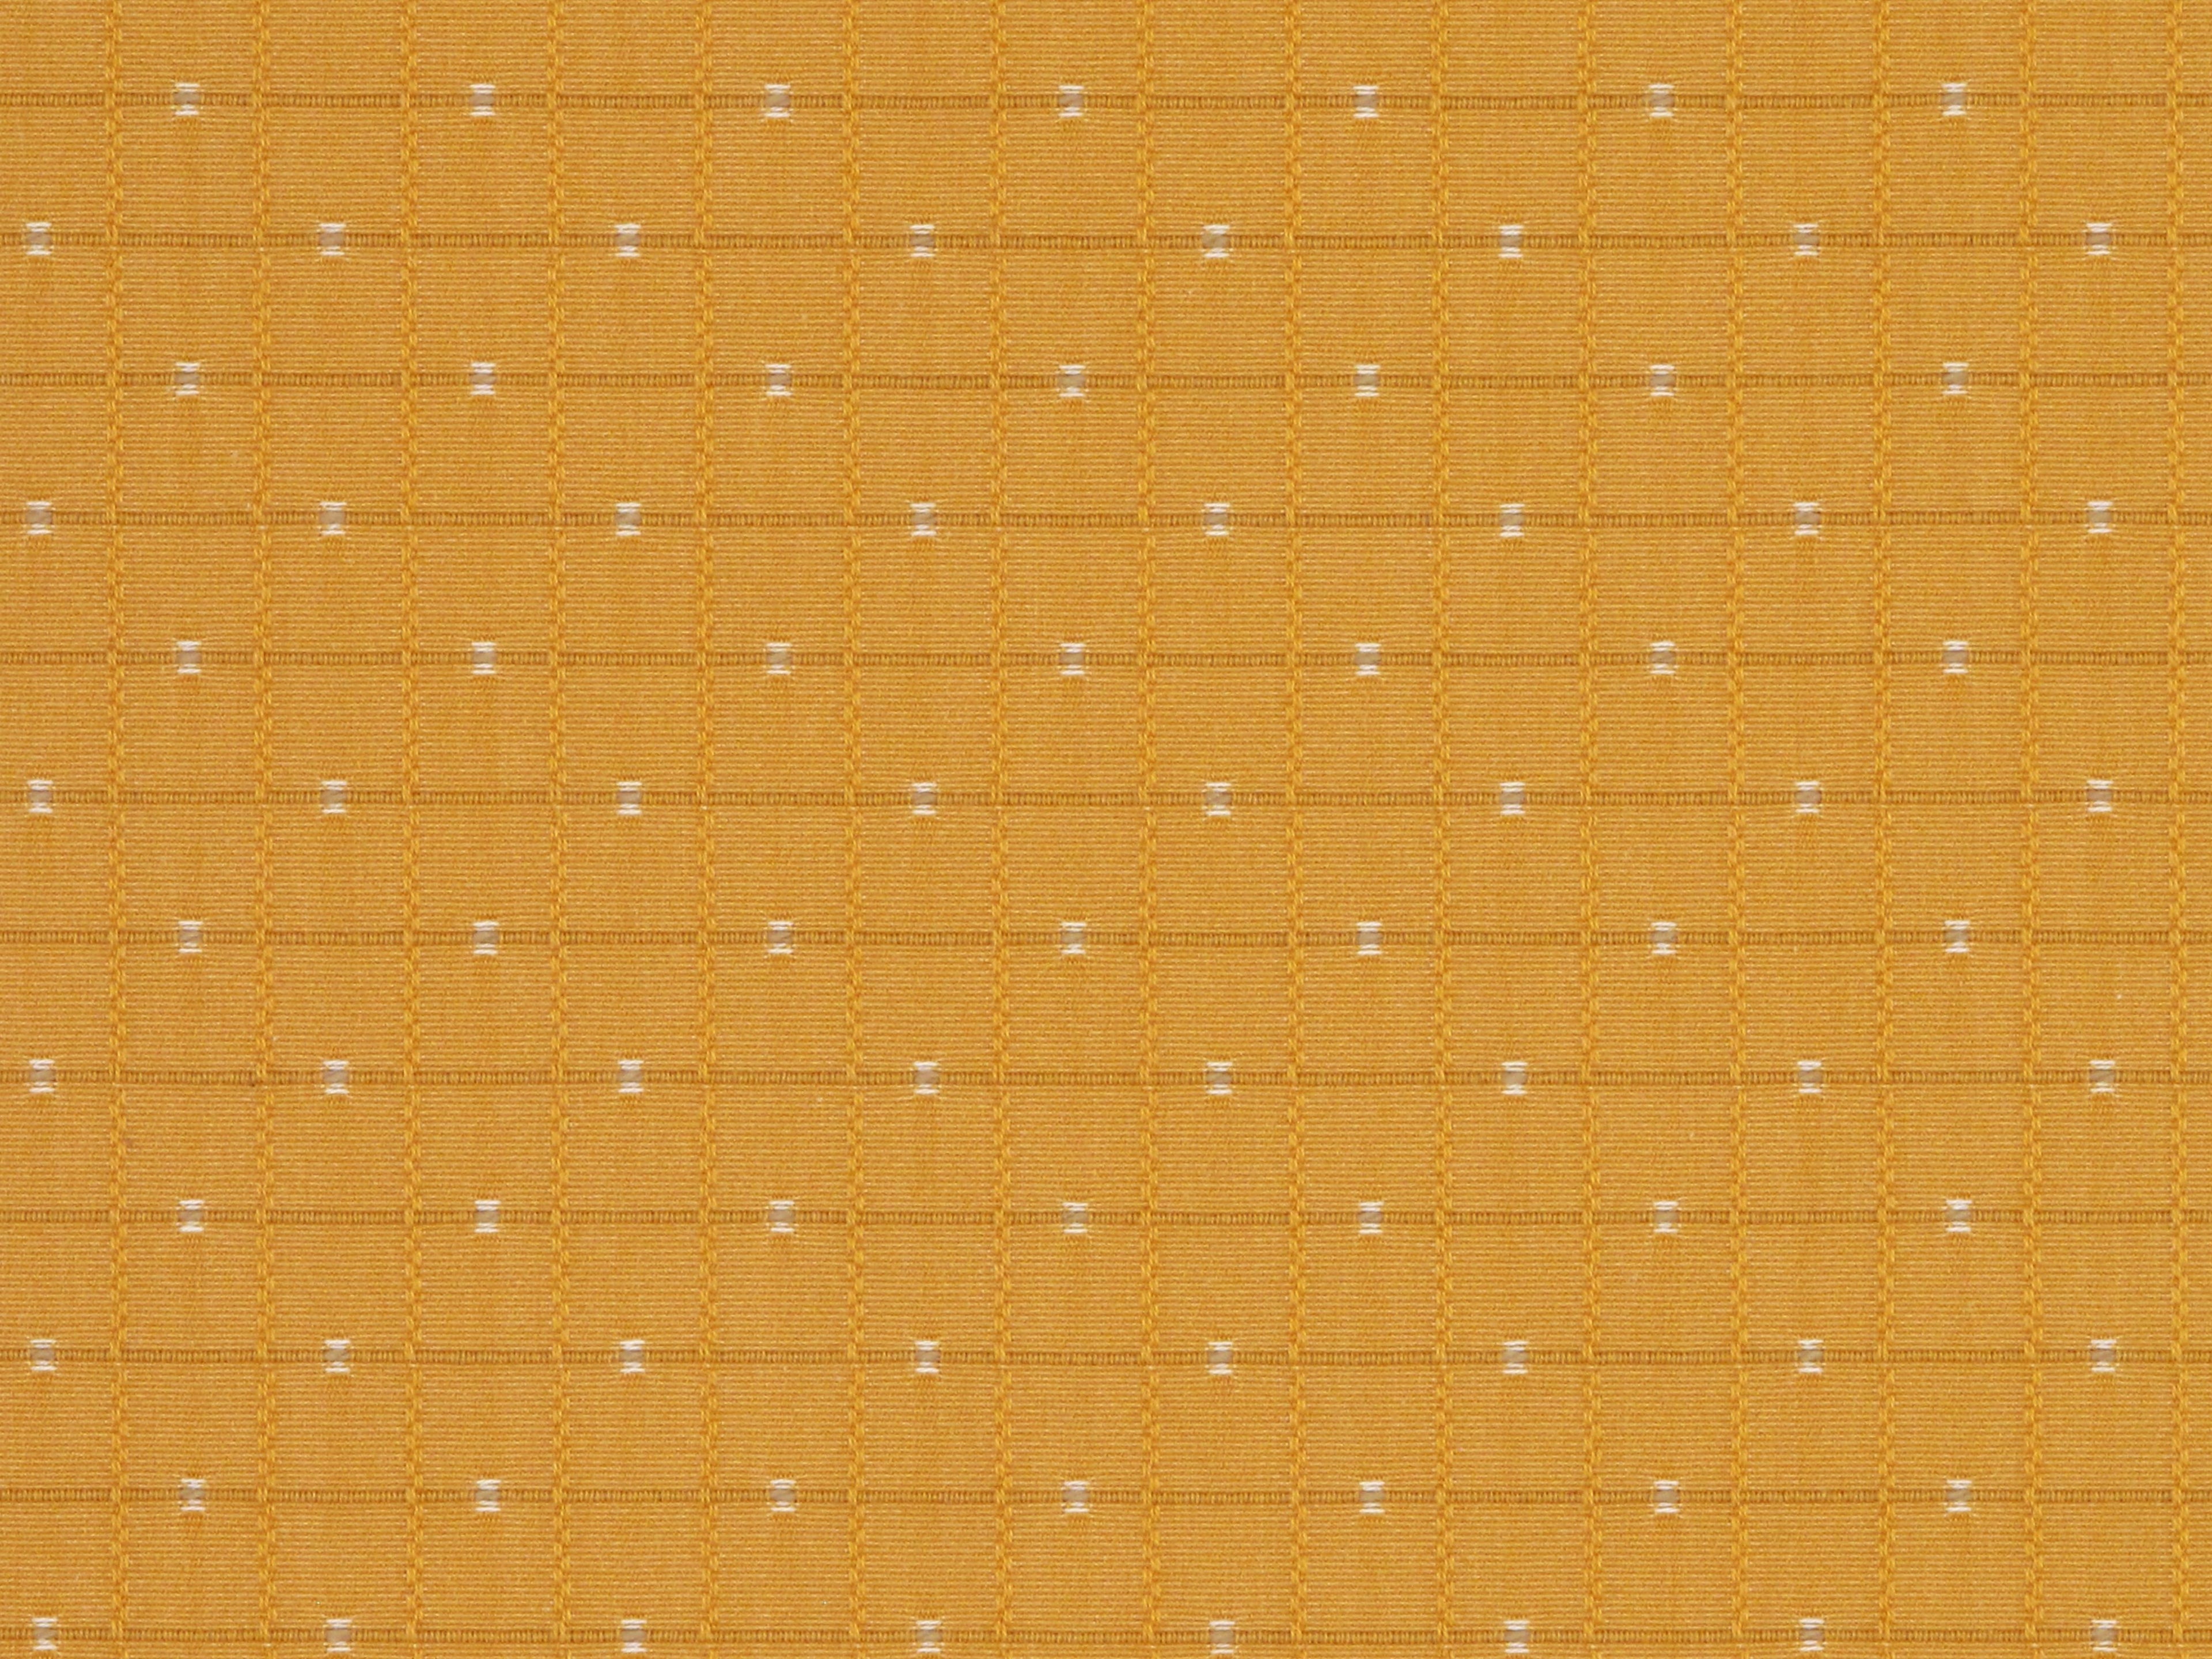 Casino fabric in maize/grey color - pattern number UA 00061930 - by Scalamandre in the Old World Weavers collection